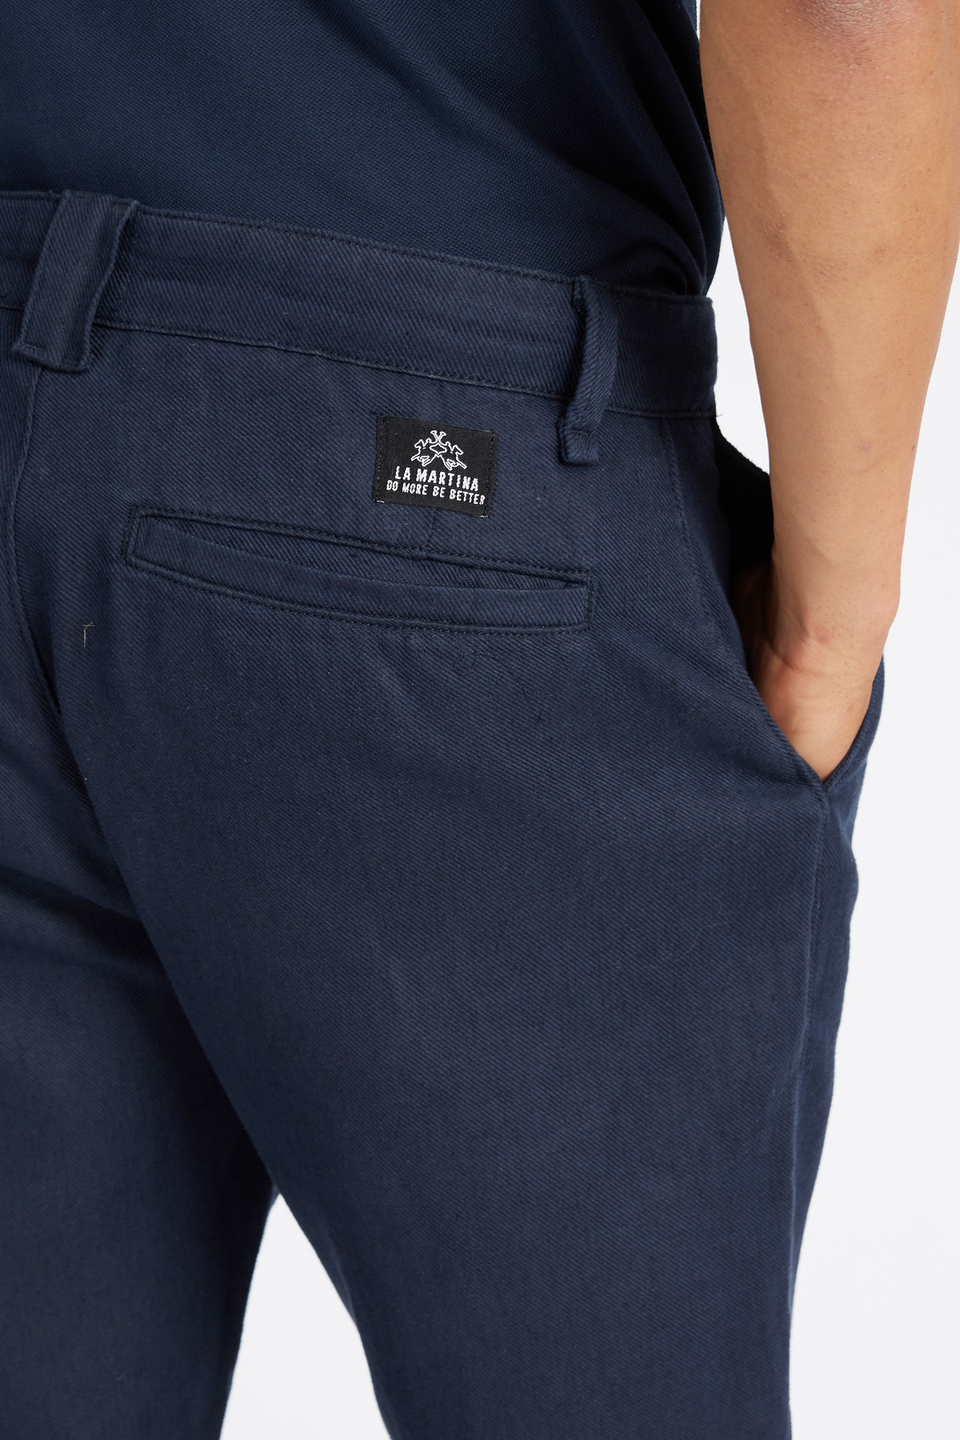 Straight cut men's chino trousers in plain color Logos - Vickan | La Martina - Official Online Shop